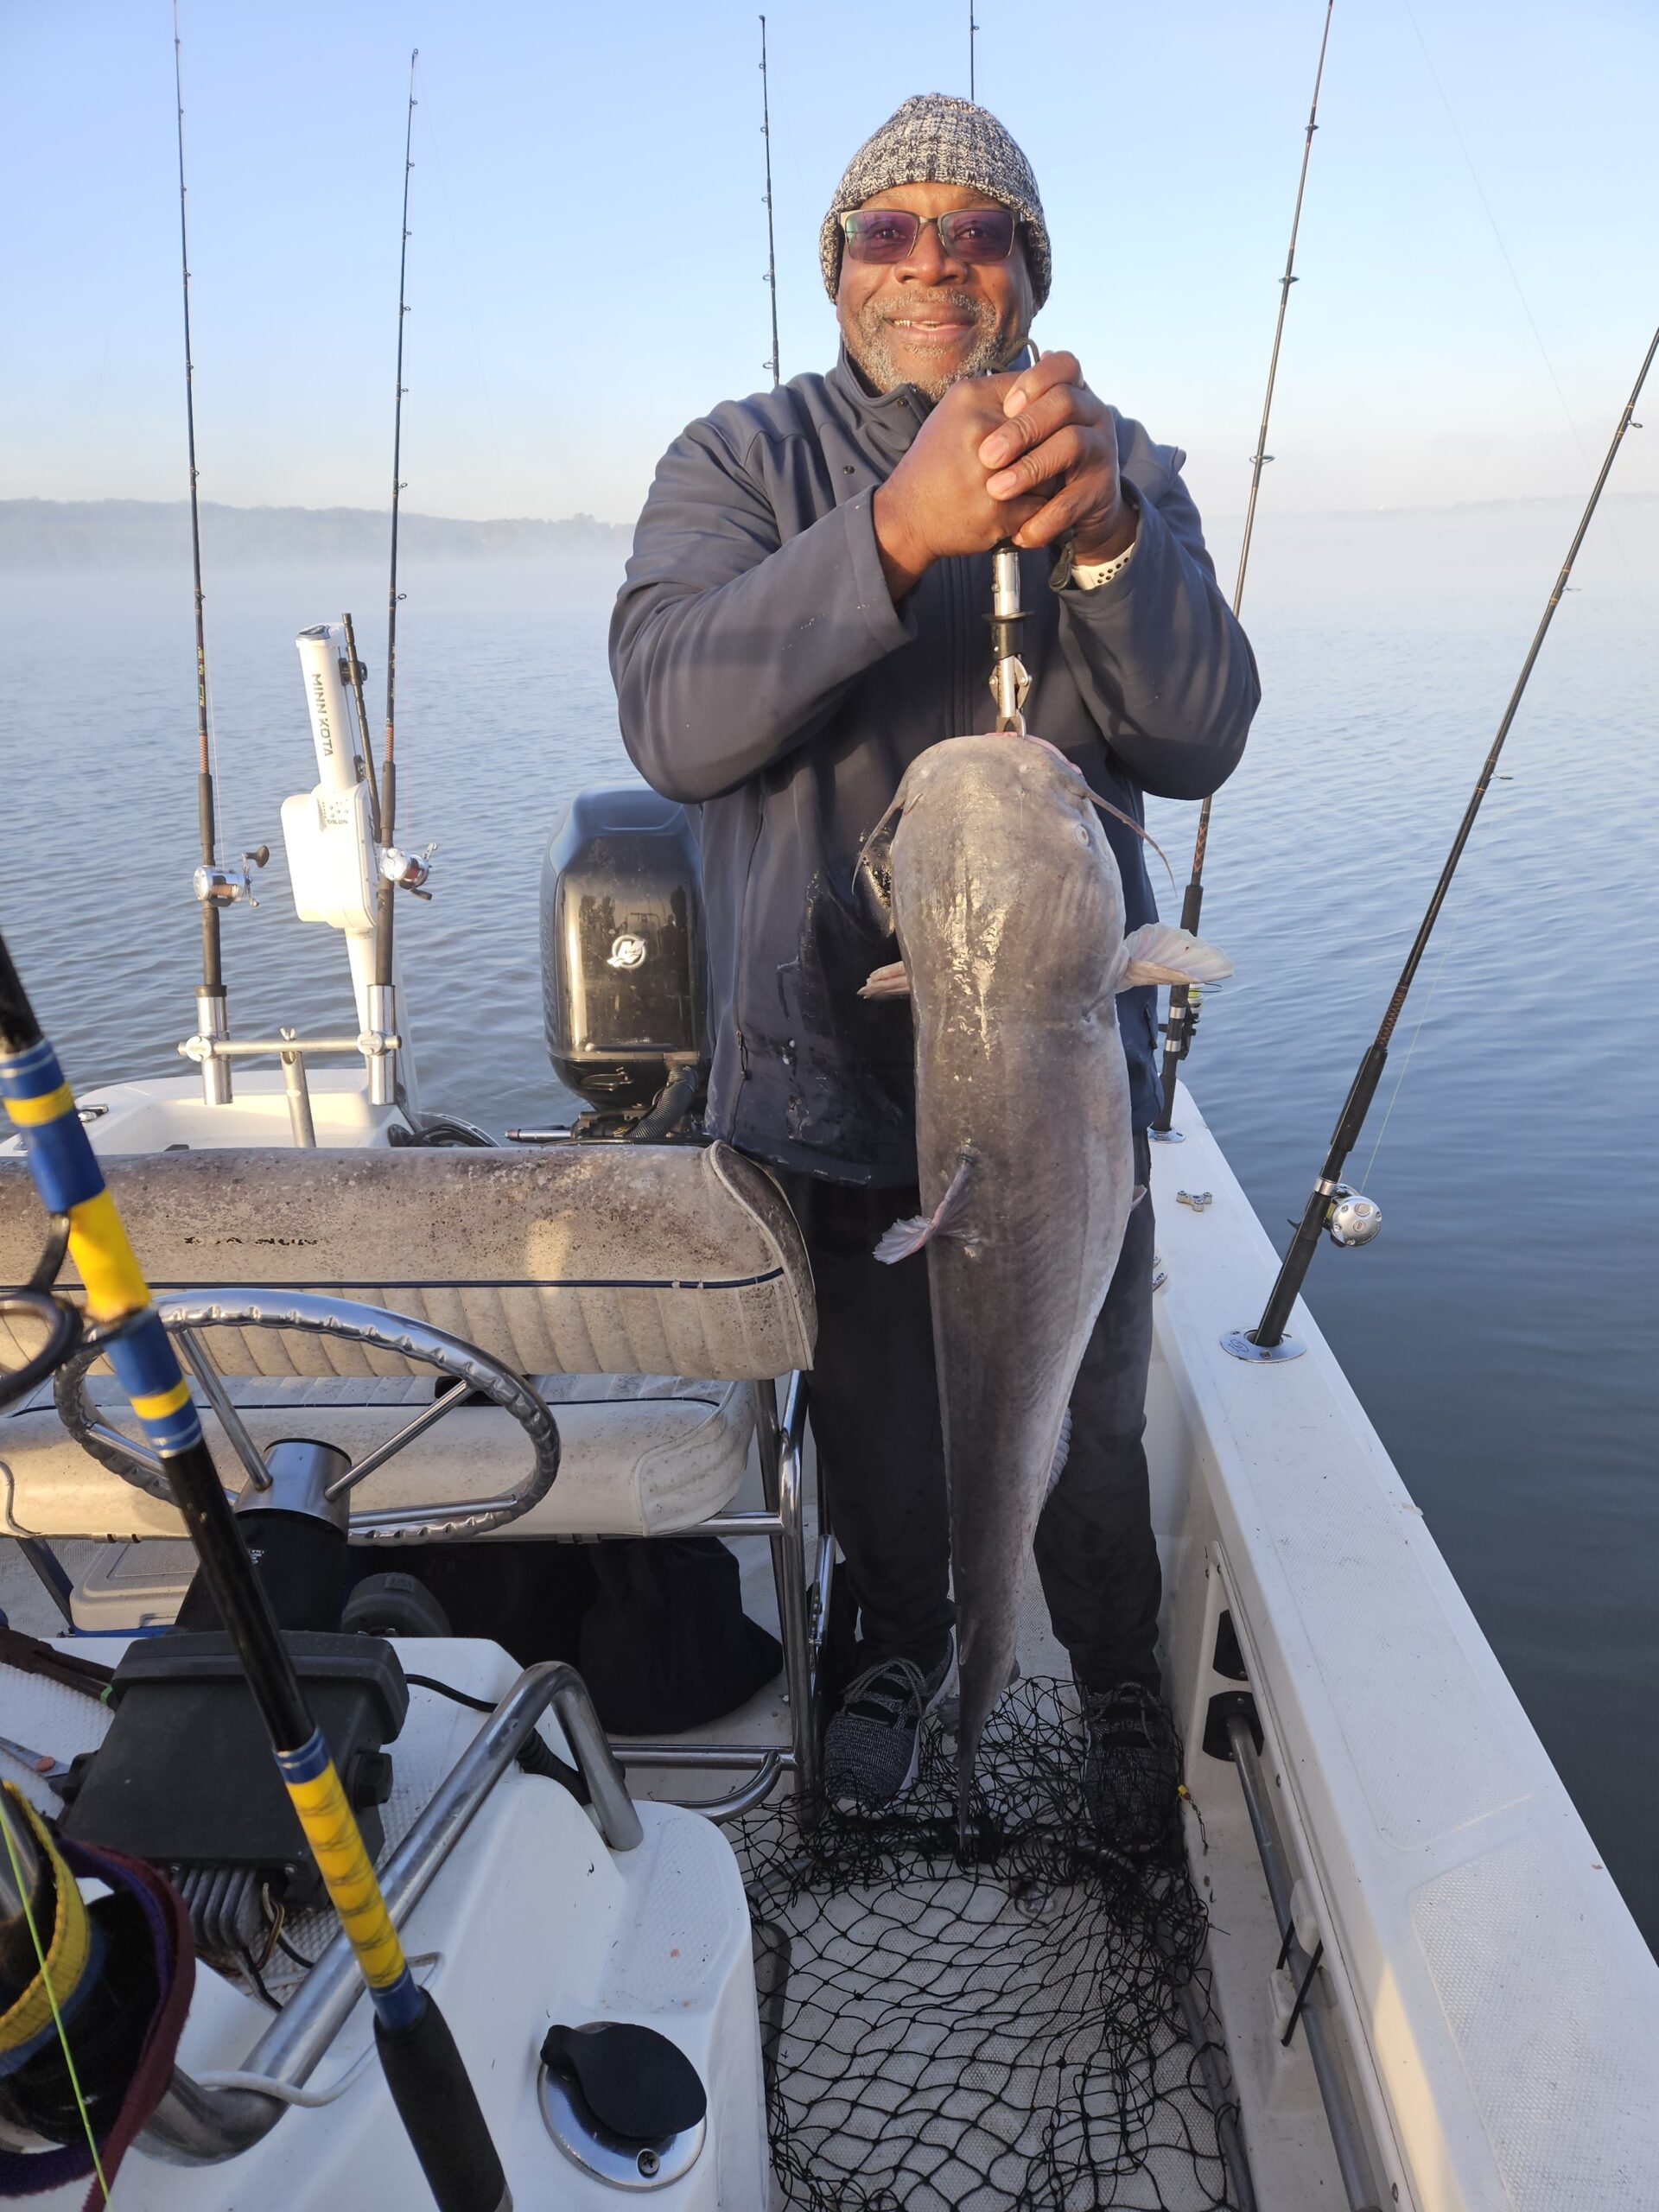 https://indianheadcharters.com/wp-content/uploads/2023/10/10-11-23-scaled.jpg